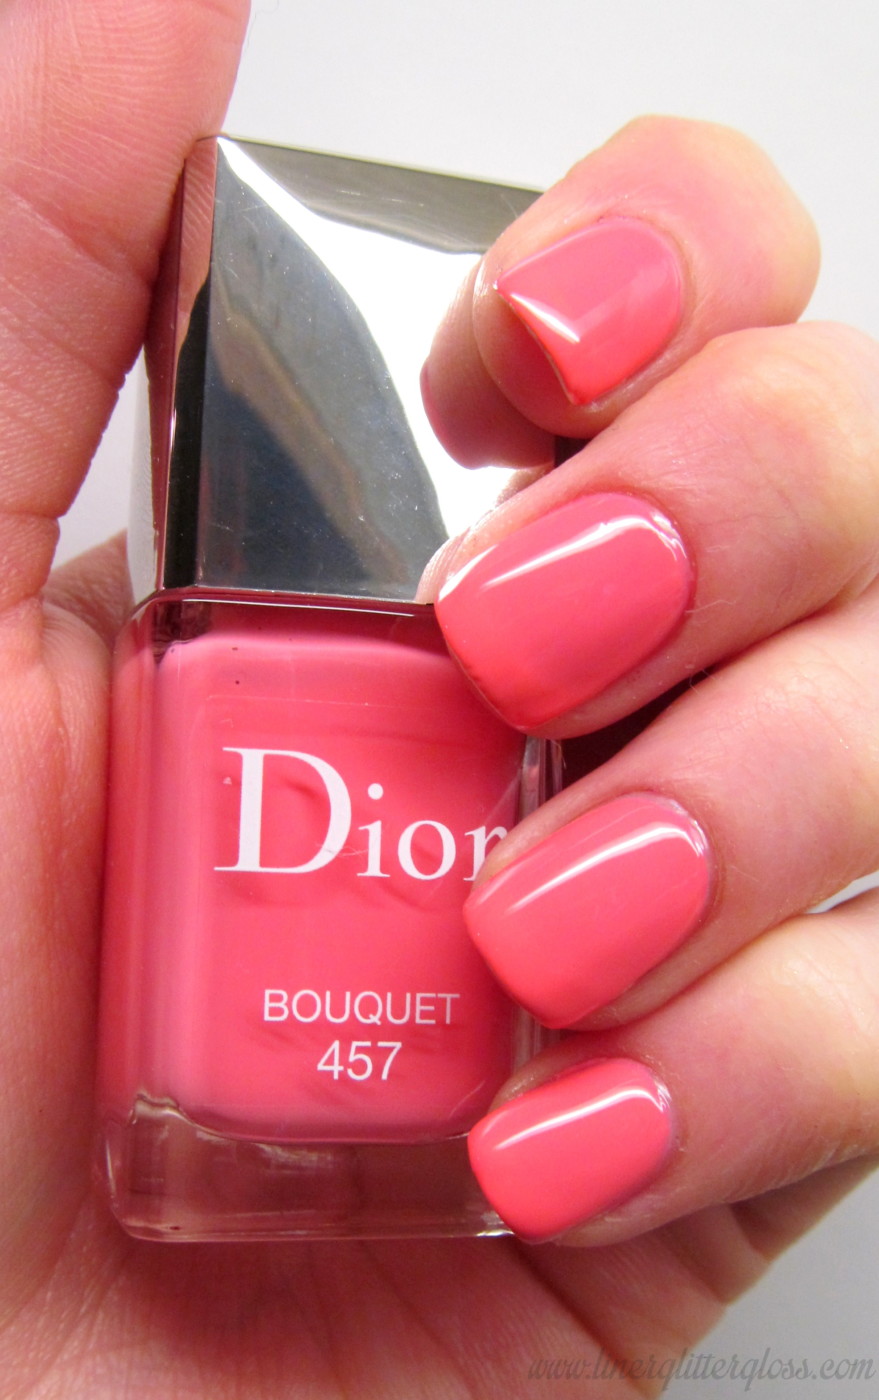 Dior 5 Couleurs Trianon Edition #954 Pink Pompadour from Spring